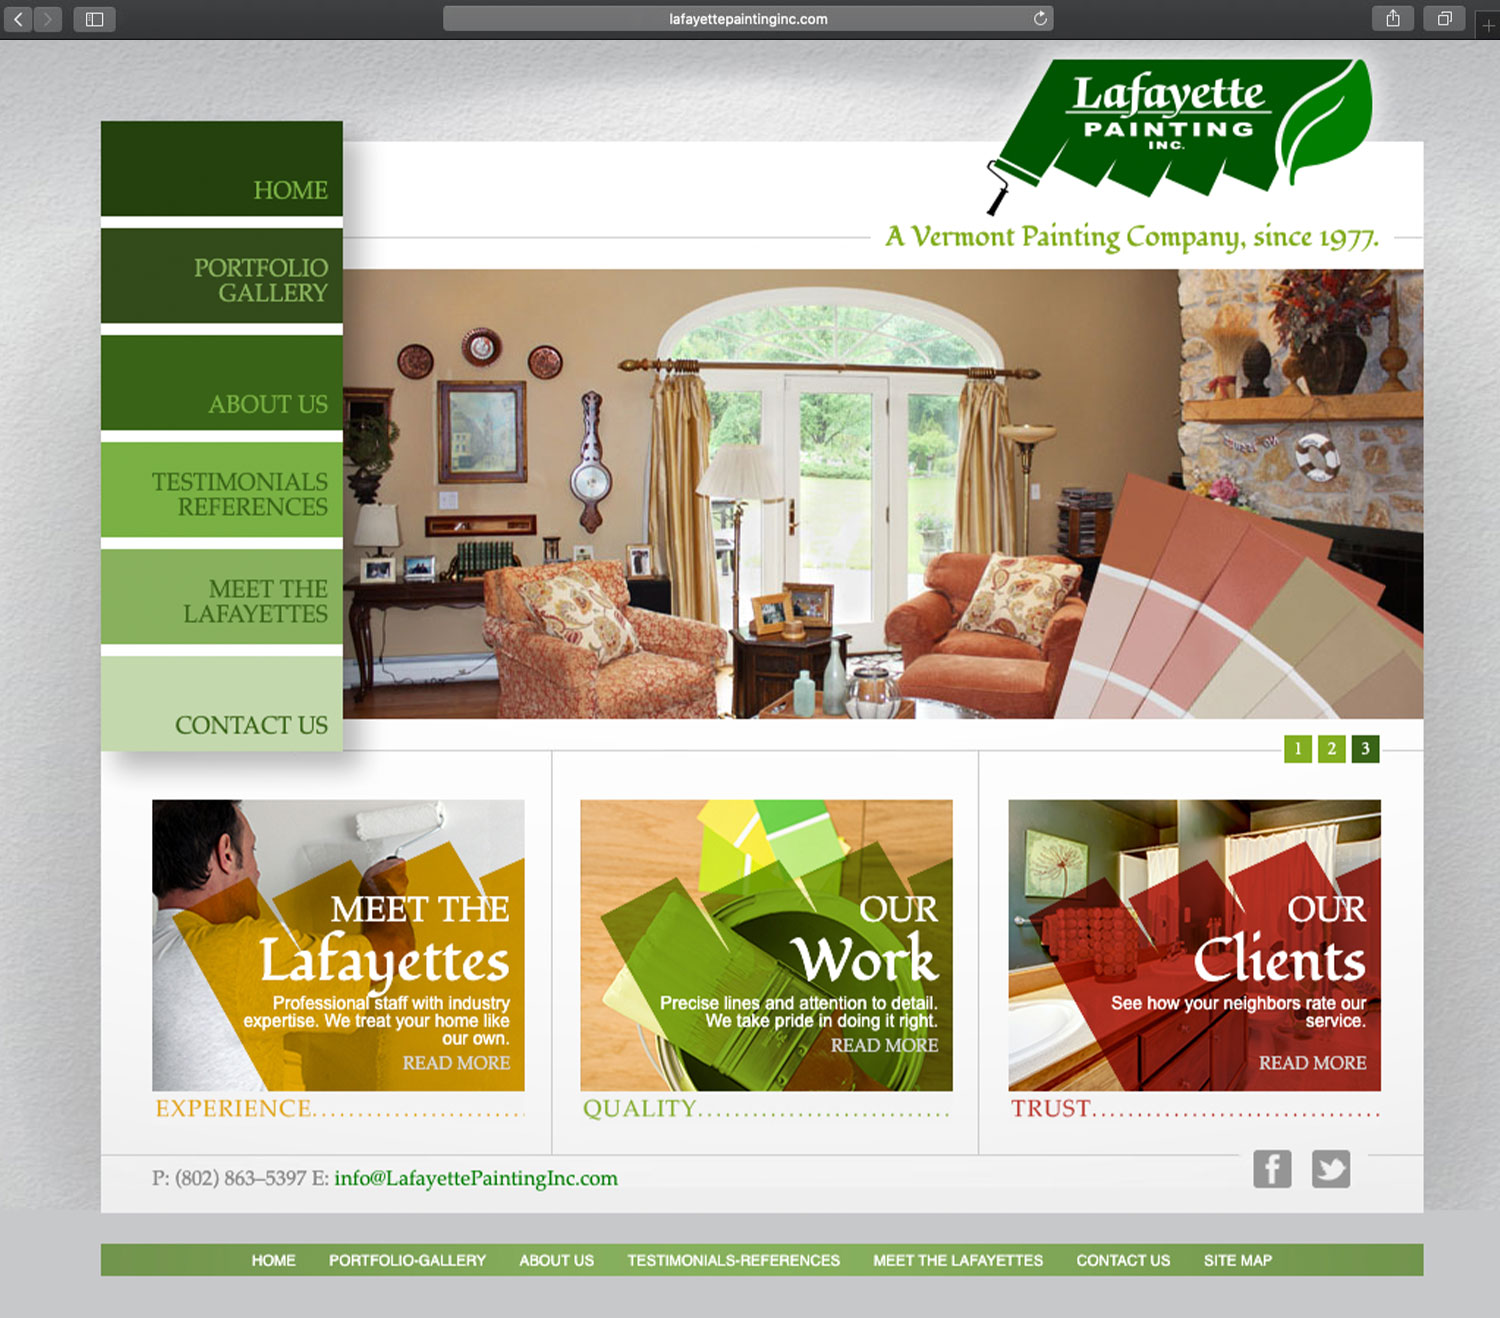 Website design and website development for Lafayette Painting - homepage view.